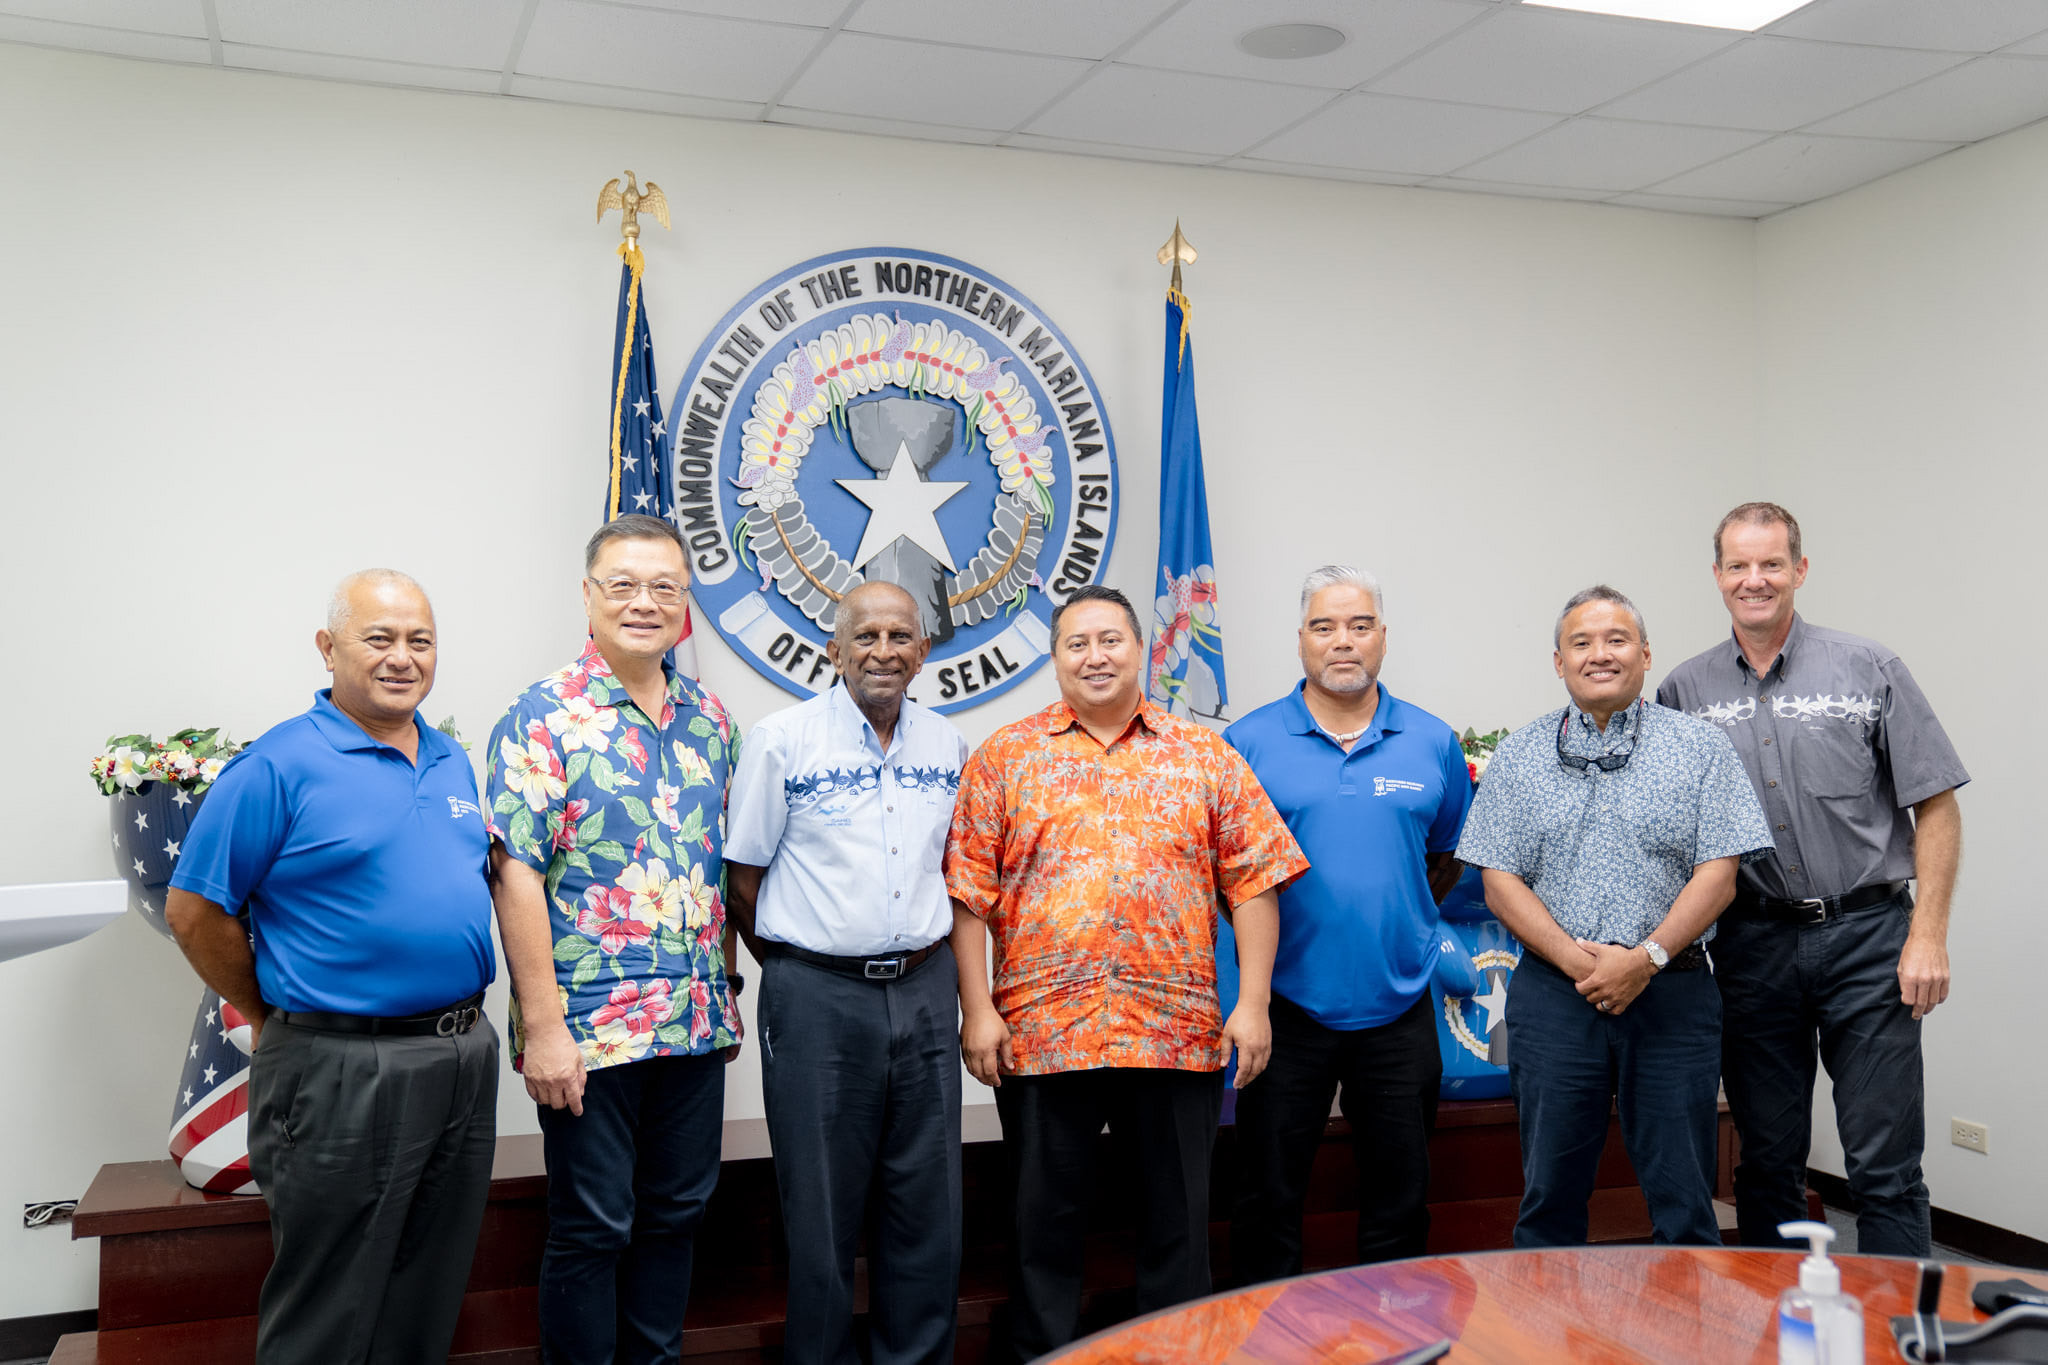 PGC President Vidhya Lakhan, third from left, met with delegates in Northern Mariana Islands for Pacific Mini Games ©PGC